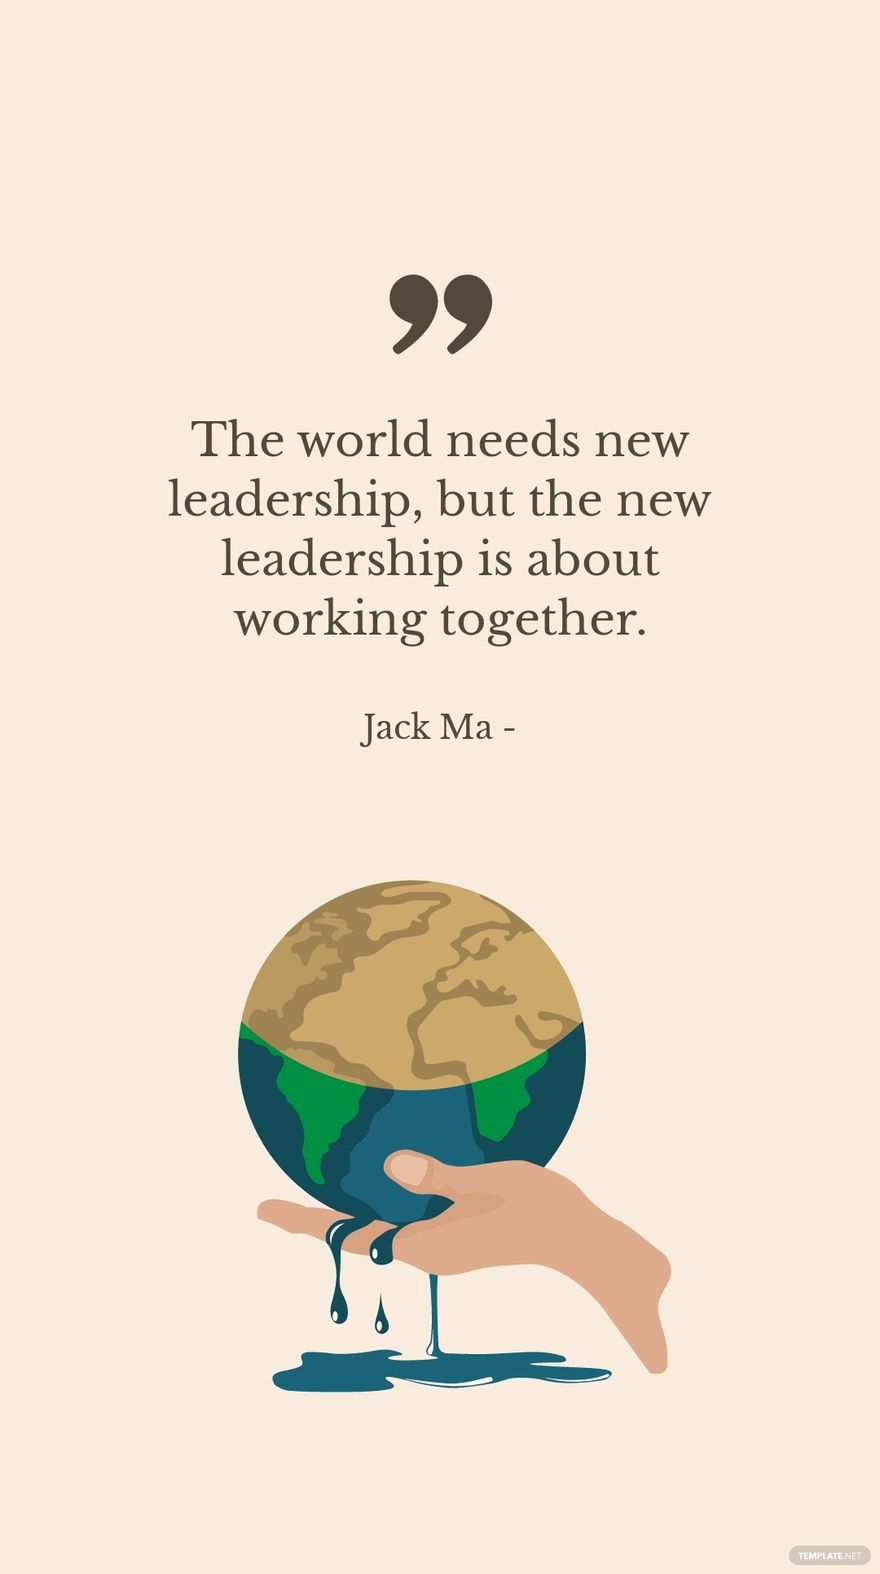 Jack Ma - The world needs new leadership, but the new leadership is about working together. in JPG